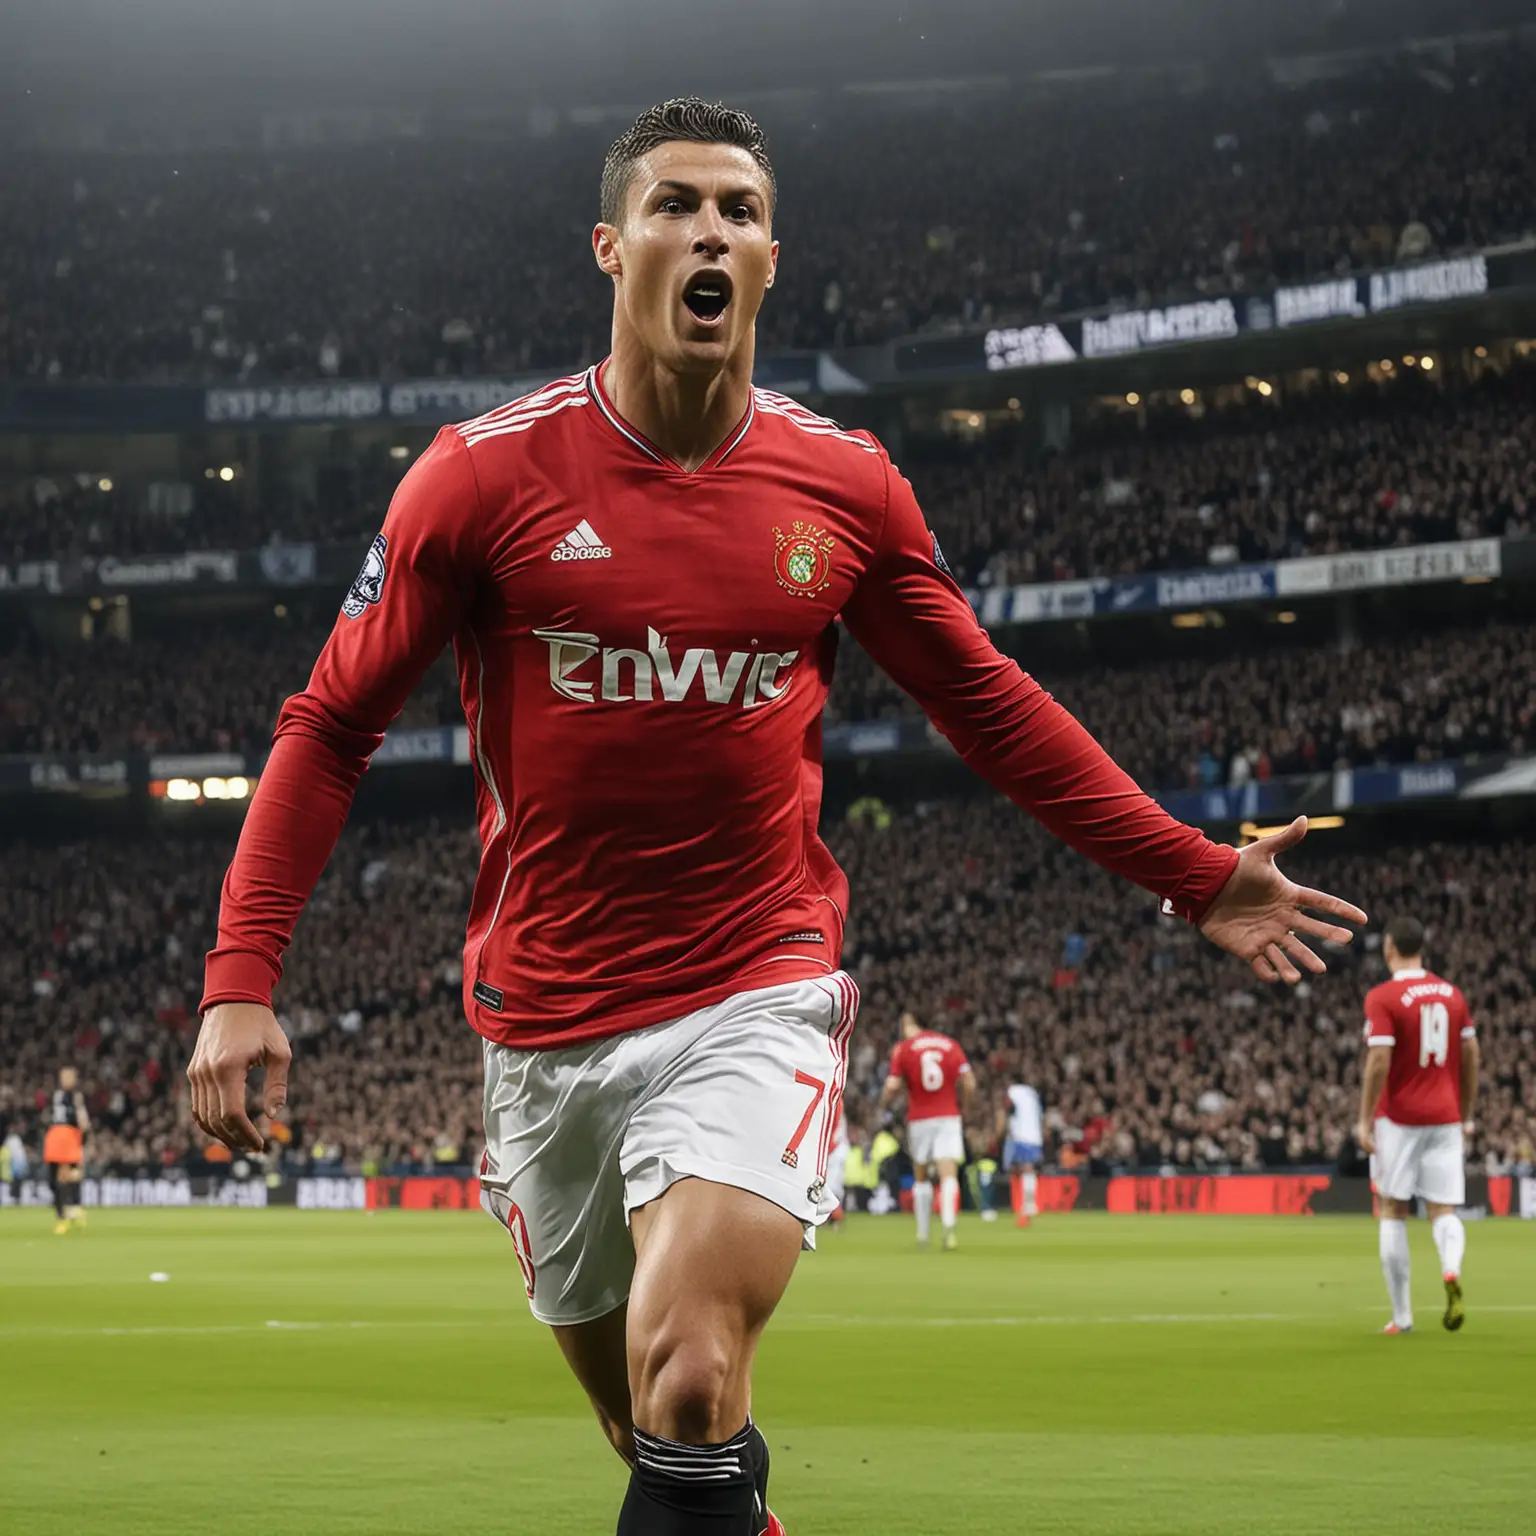 Soccer Icon Cristiano Ronaldo Displaying Victory Pose in Red Jersey